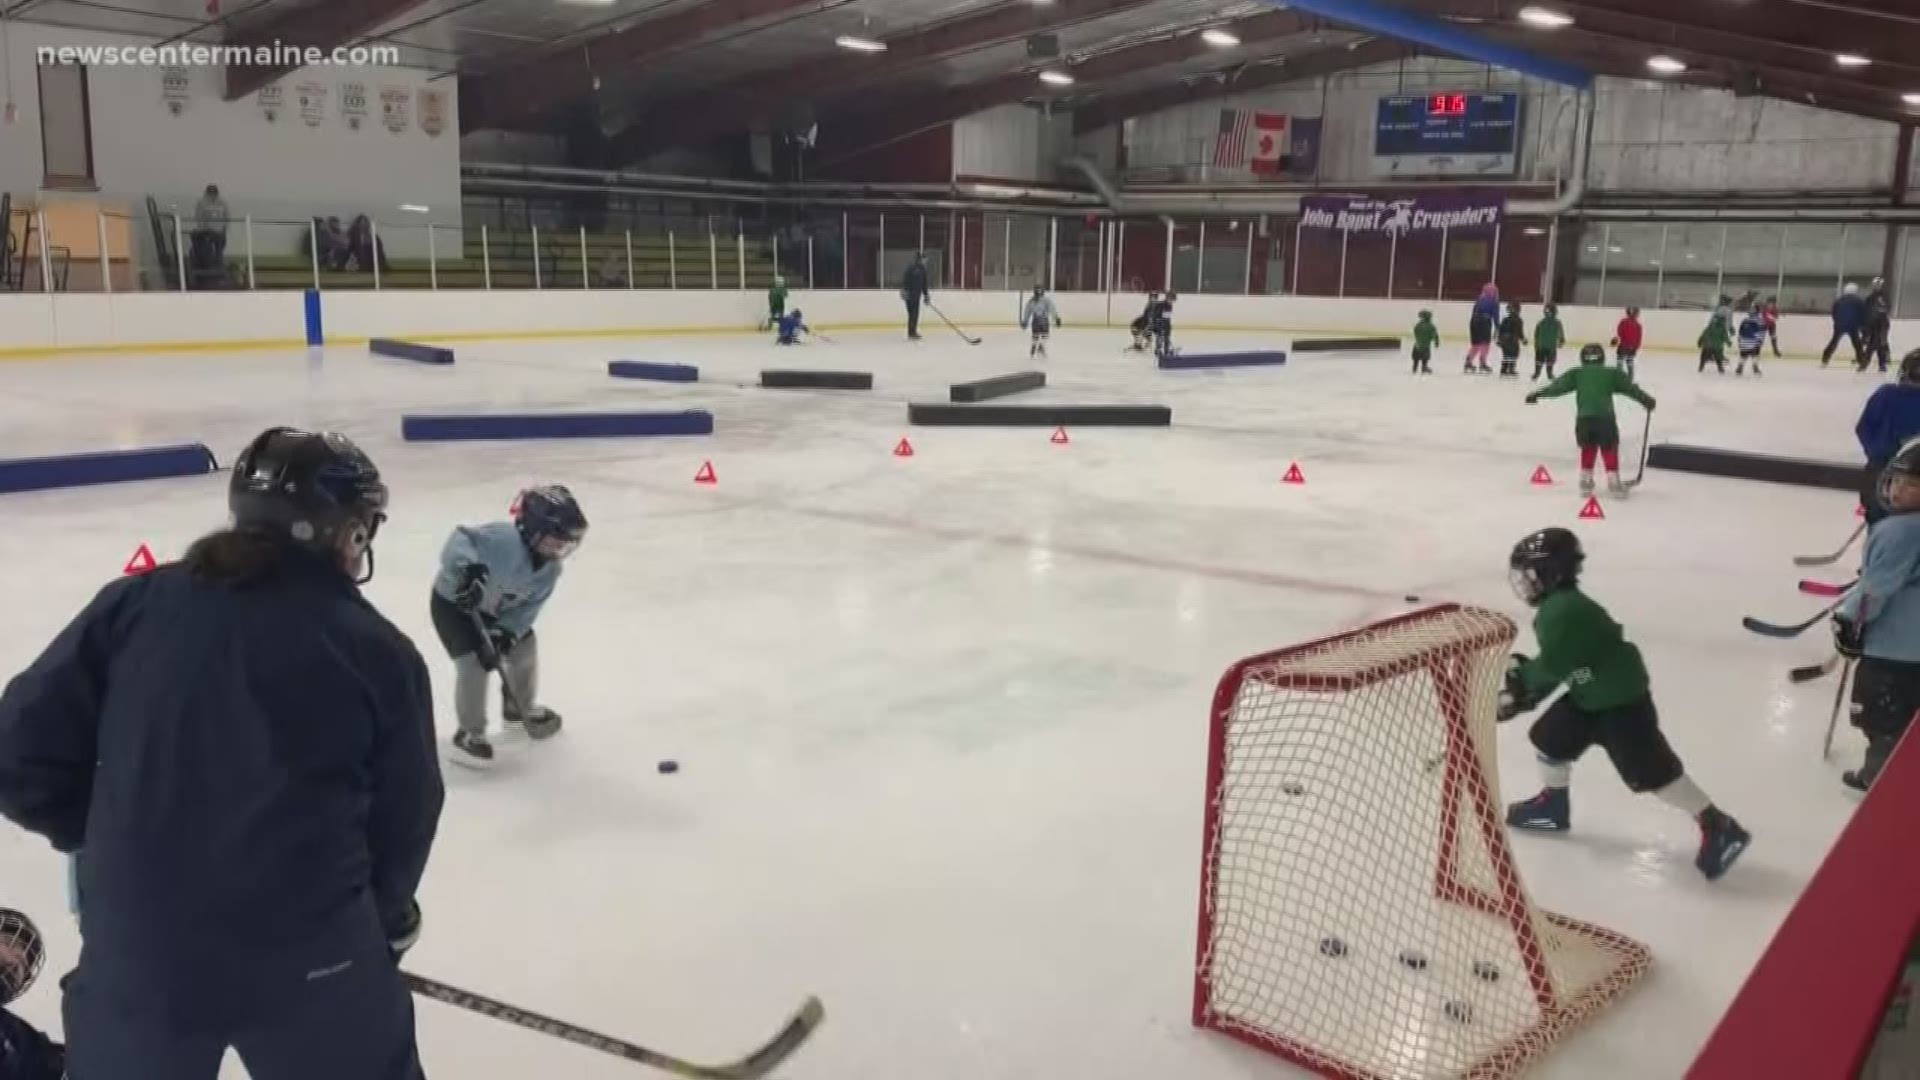 Kids learn how to skate at Sawyer Arena in Bangor.